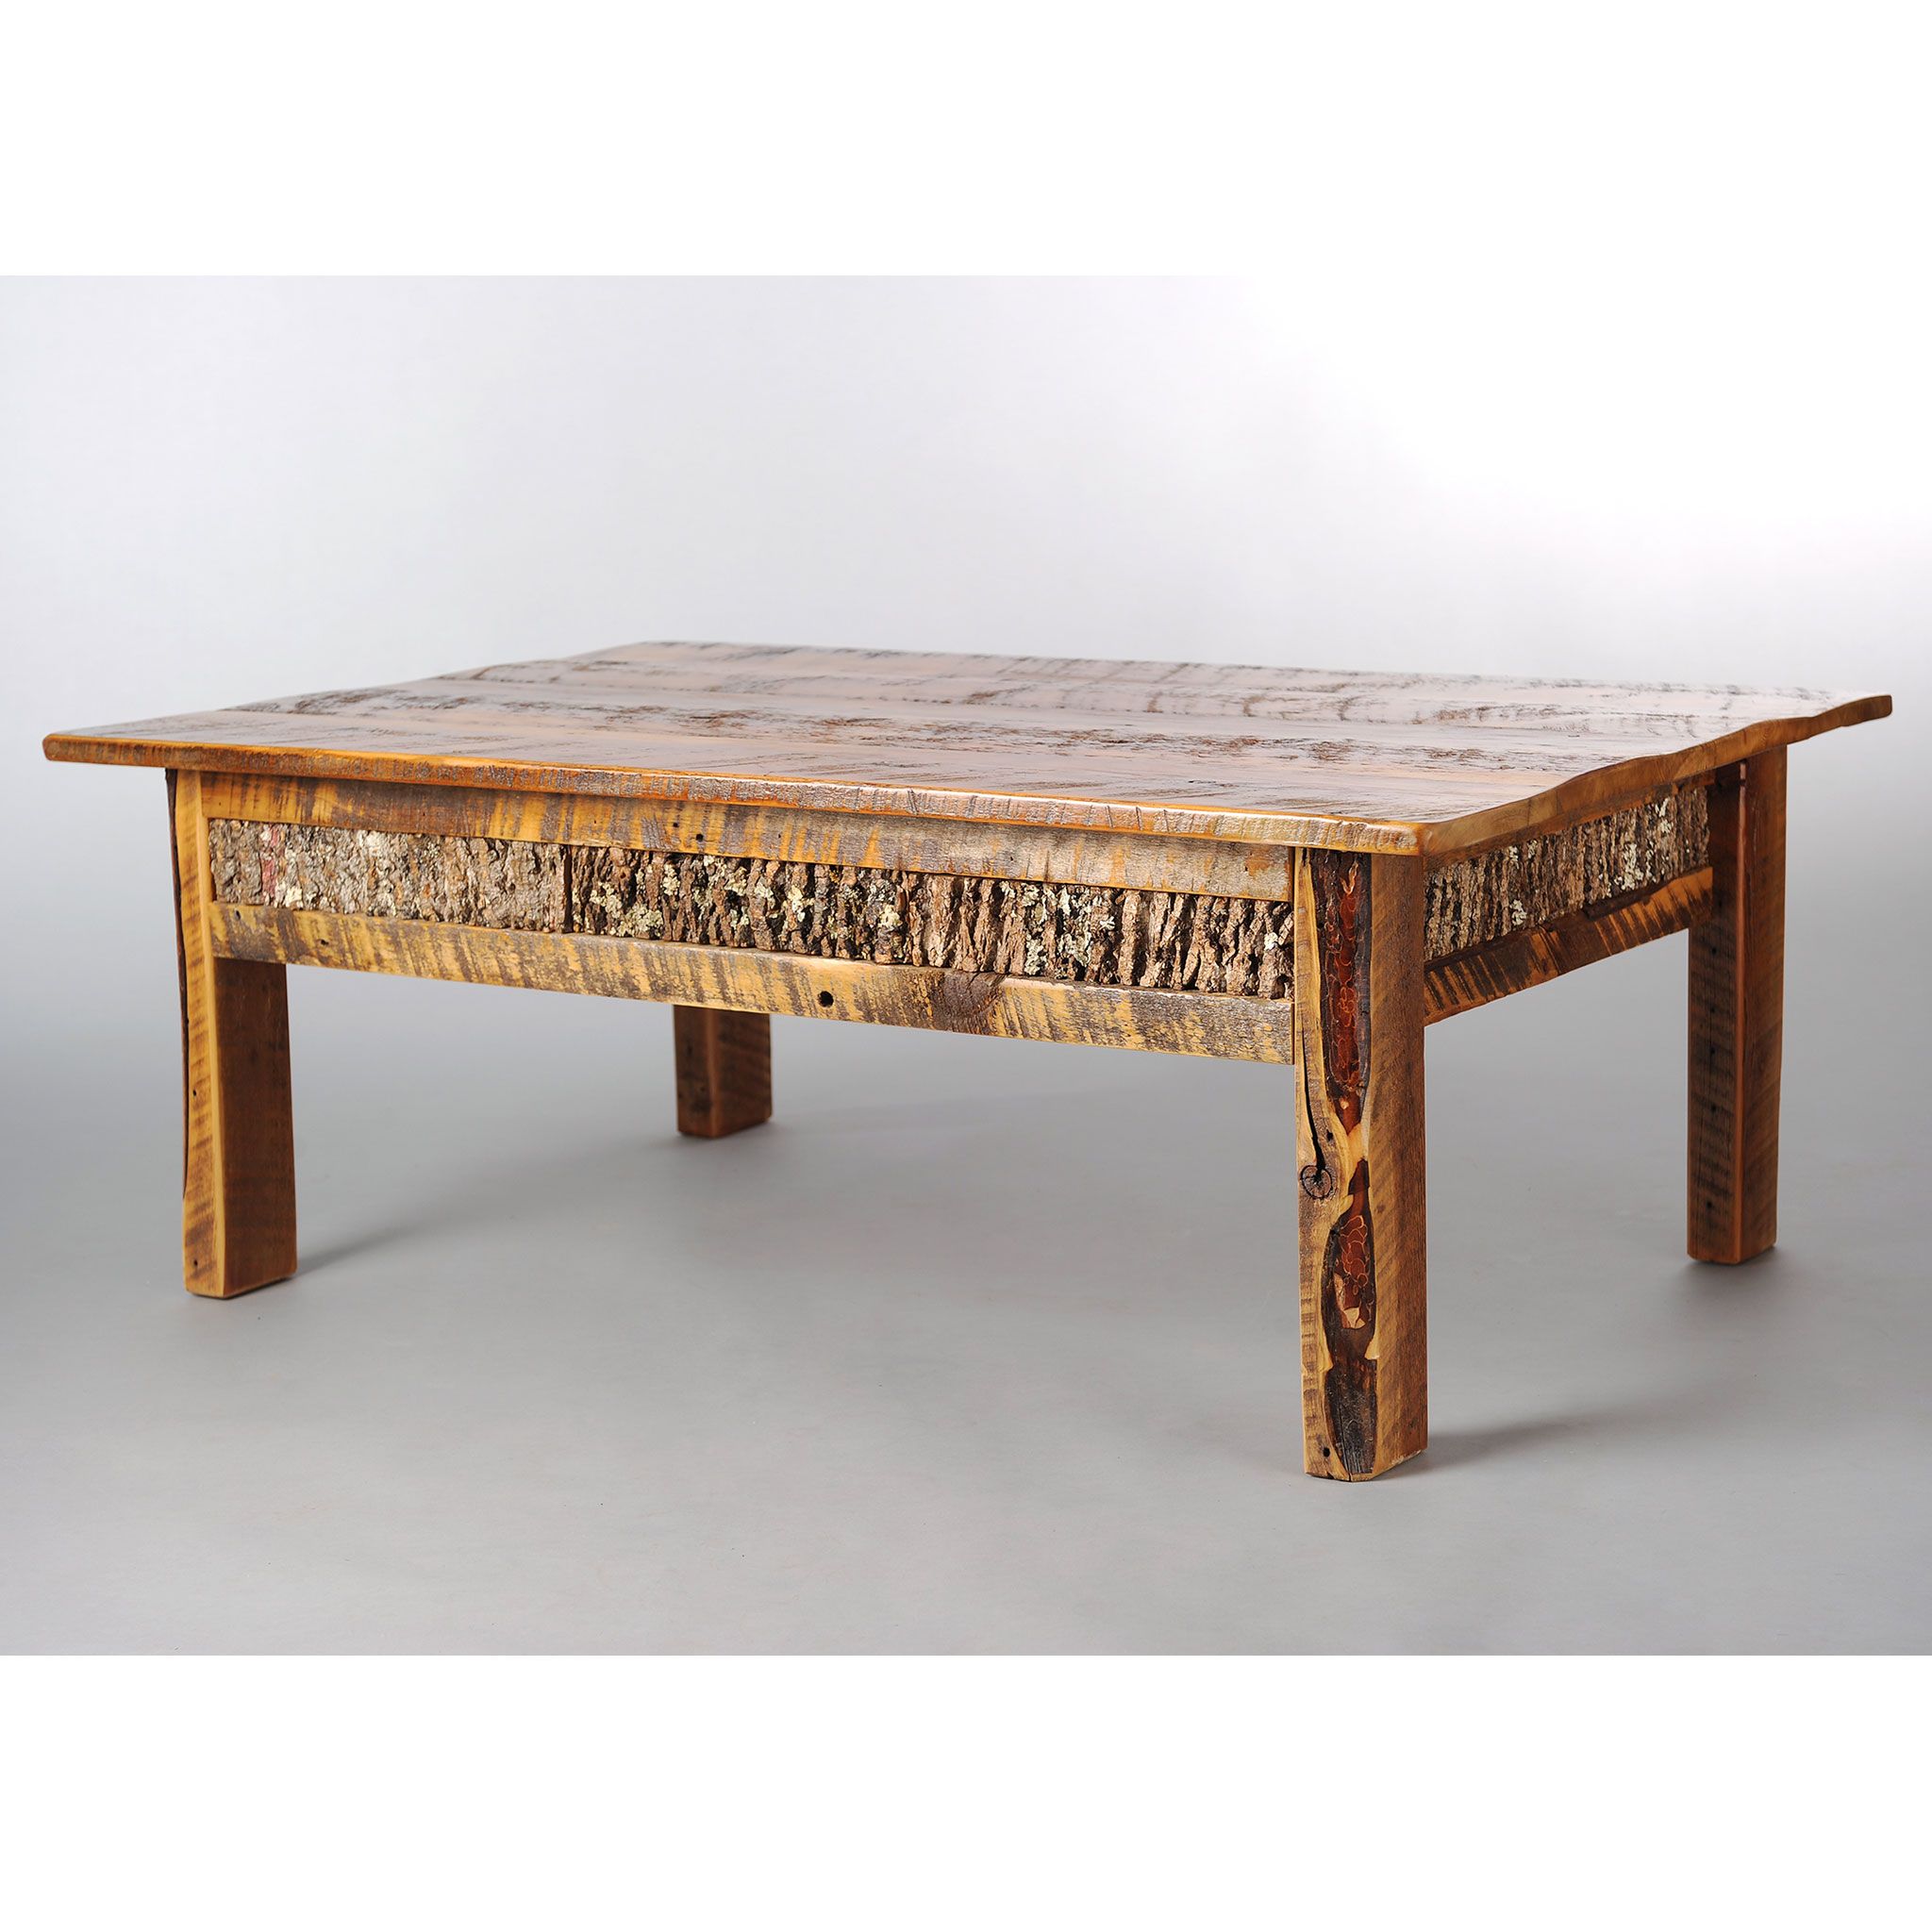 Reclaimed Wood Coffee Table With Bark Inlay | Four Corner Regarding Barnwood Coffee Tables (View 8 of 15)